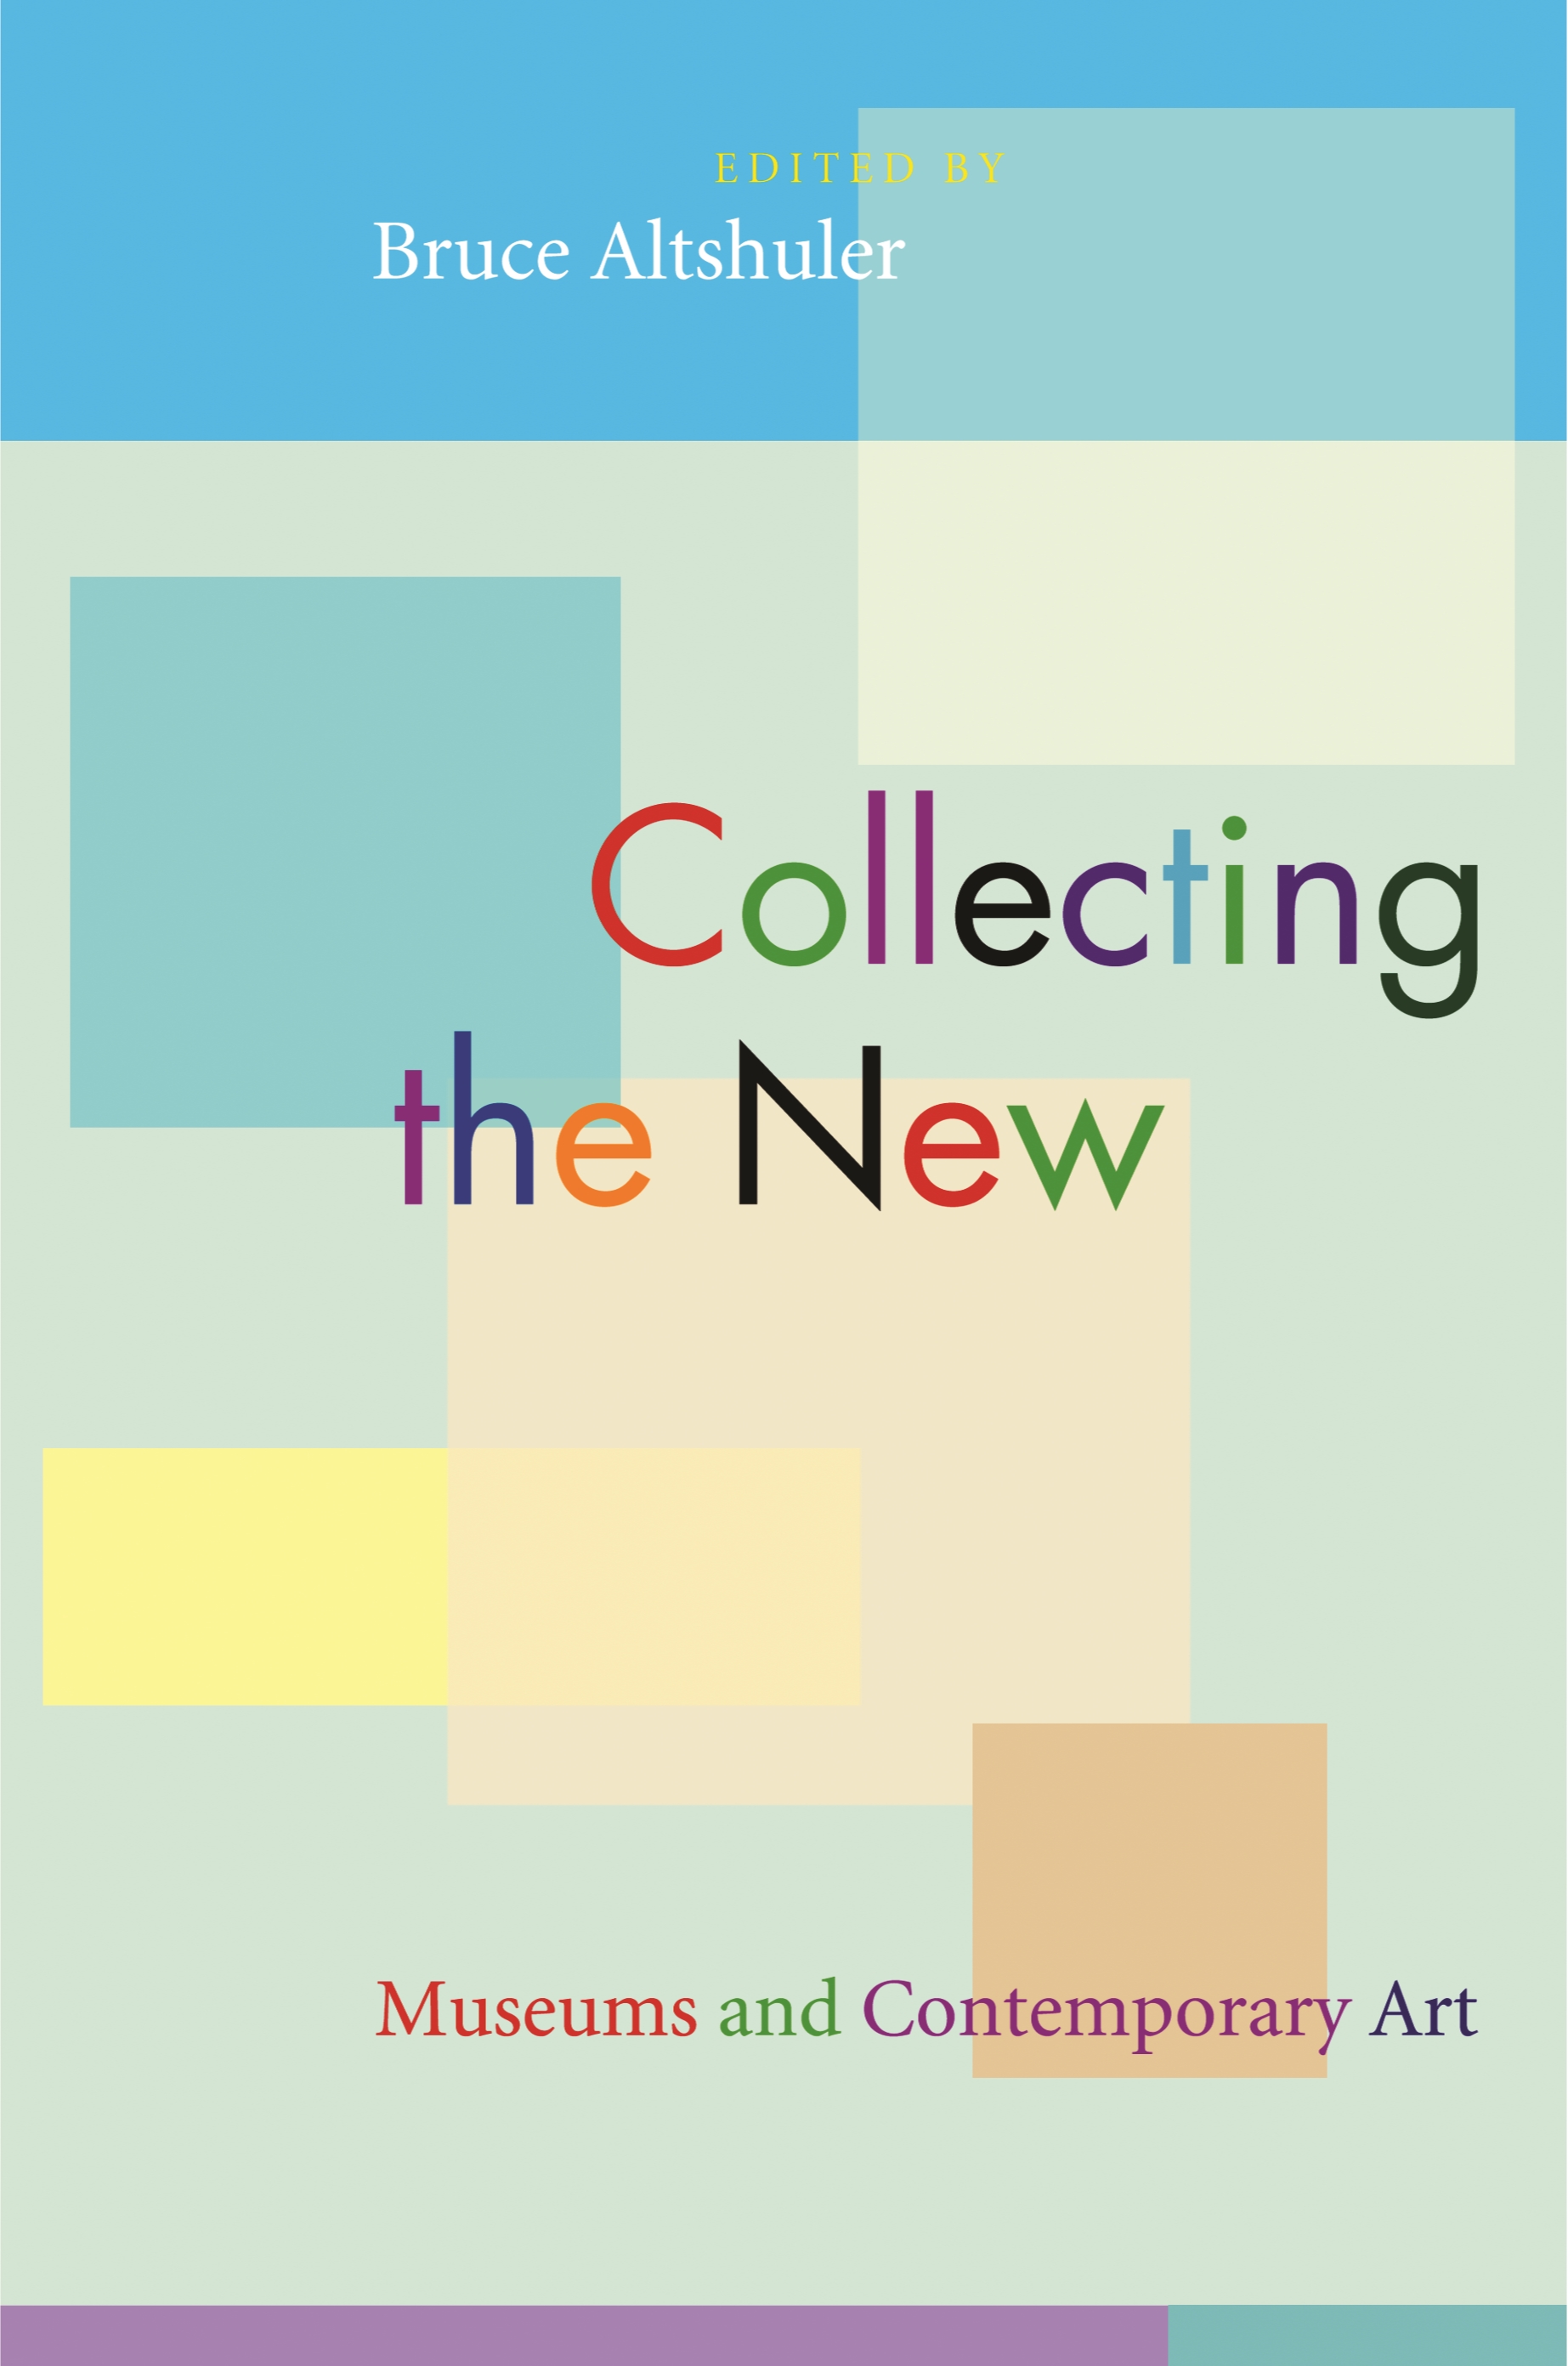 Modern Takes on the Art of Creating, Collection Development